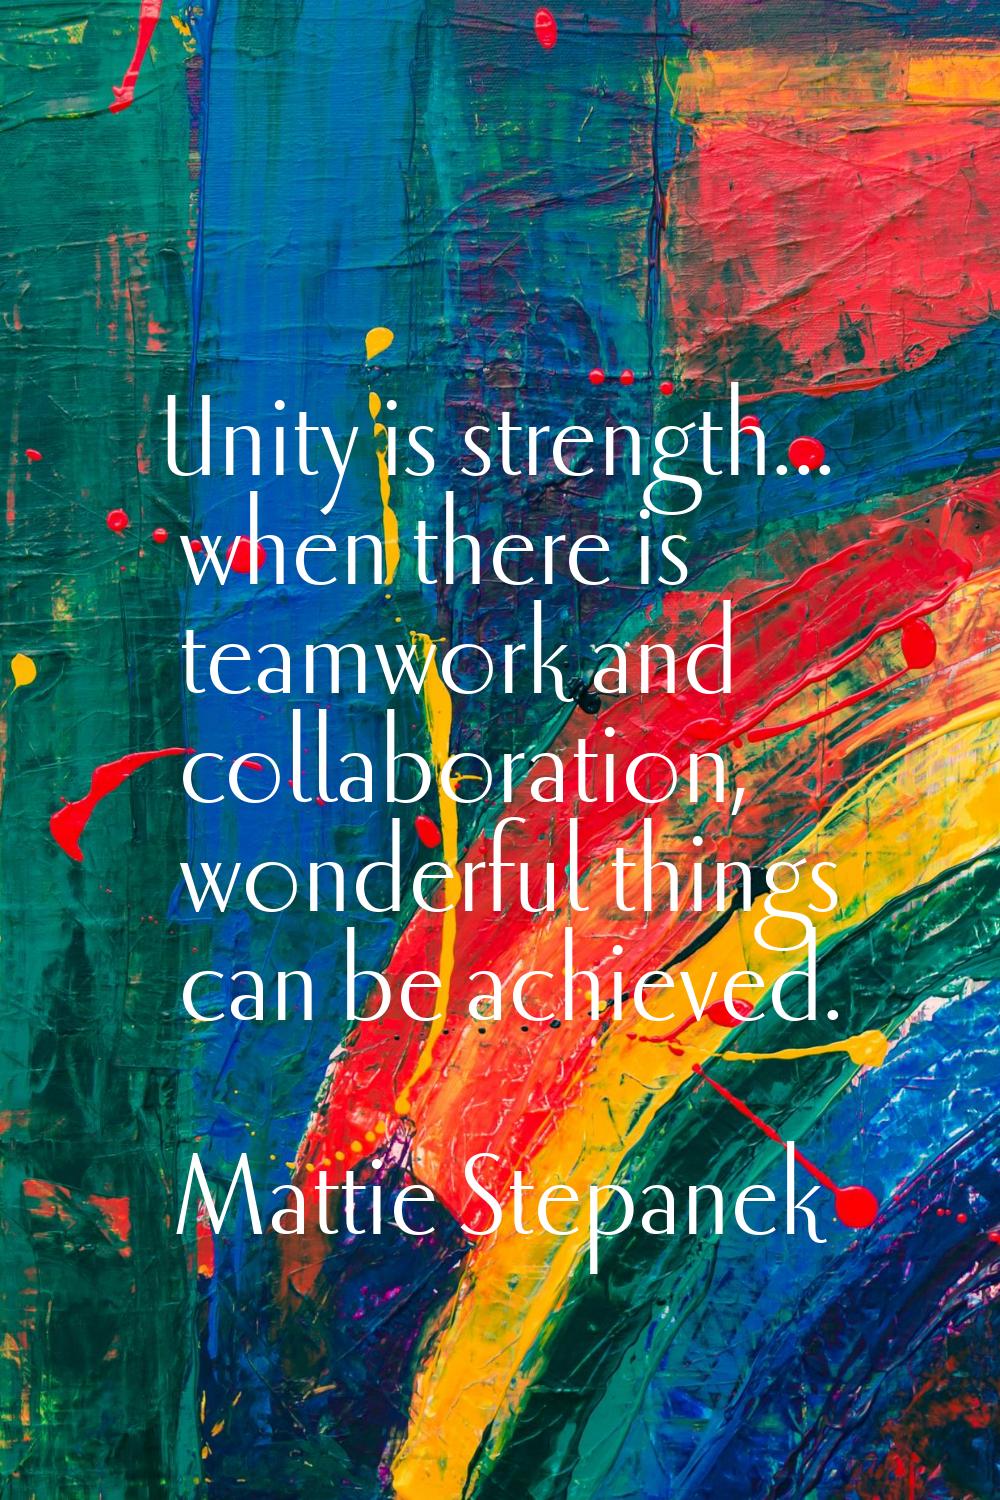 Unity is strength... when there is teamwork and collaboration, wonderful things can be achieved.